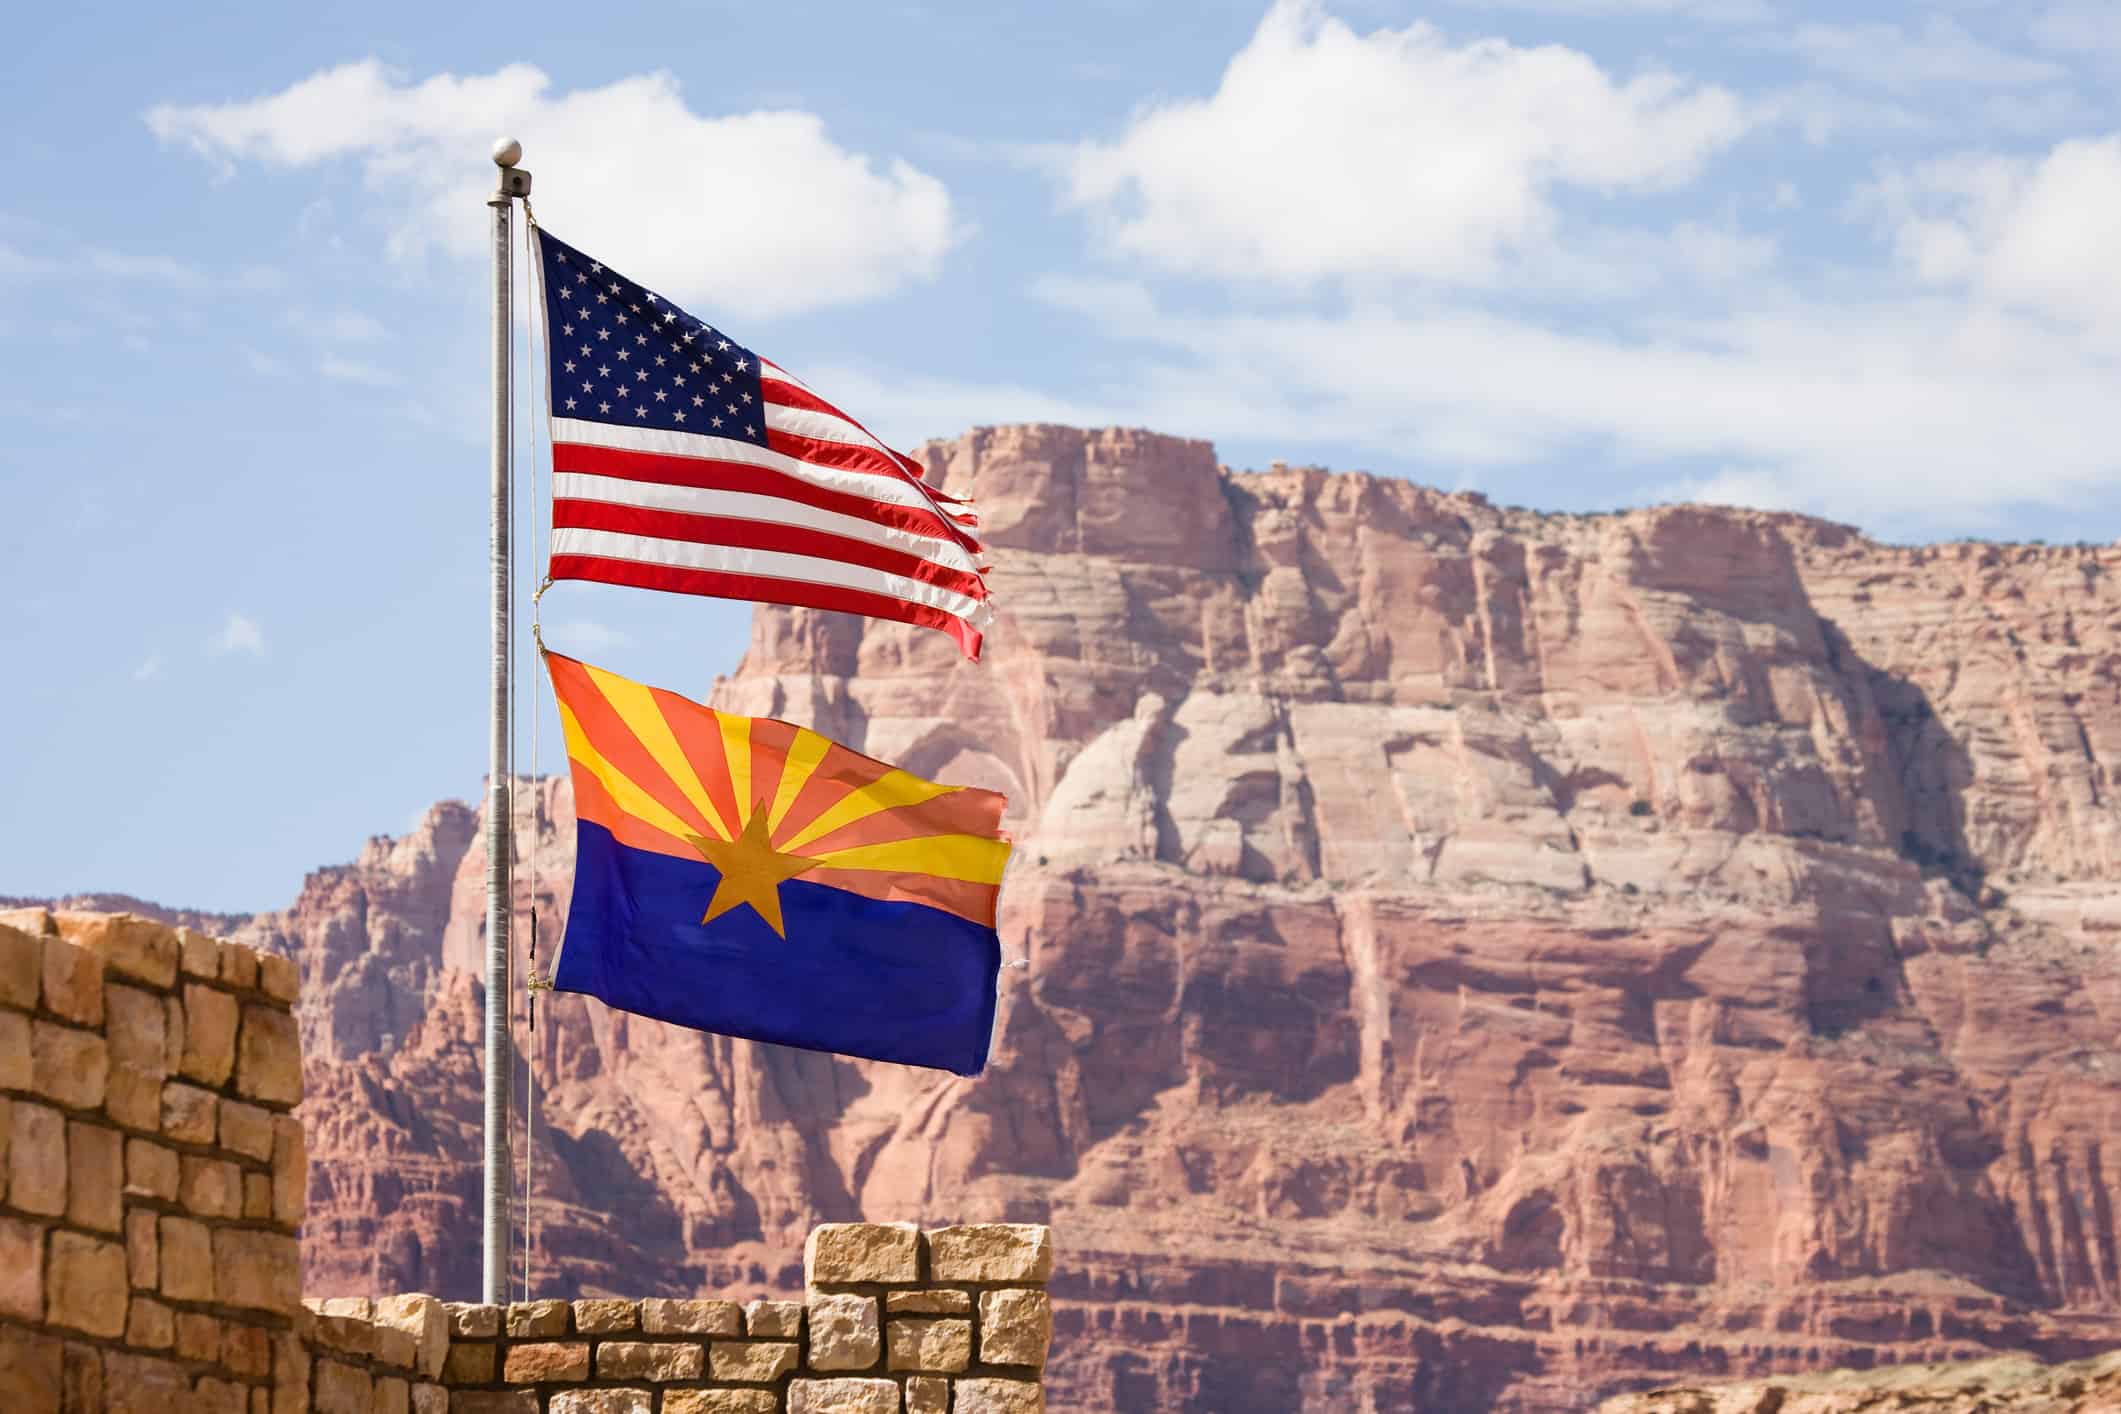 The flag of the United States of America flown above the Arizona state flag